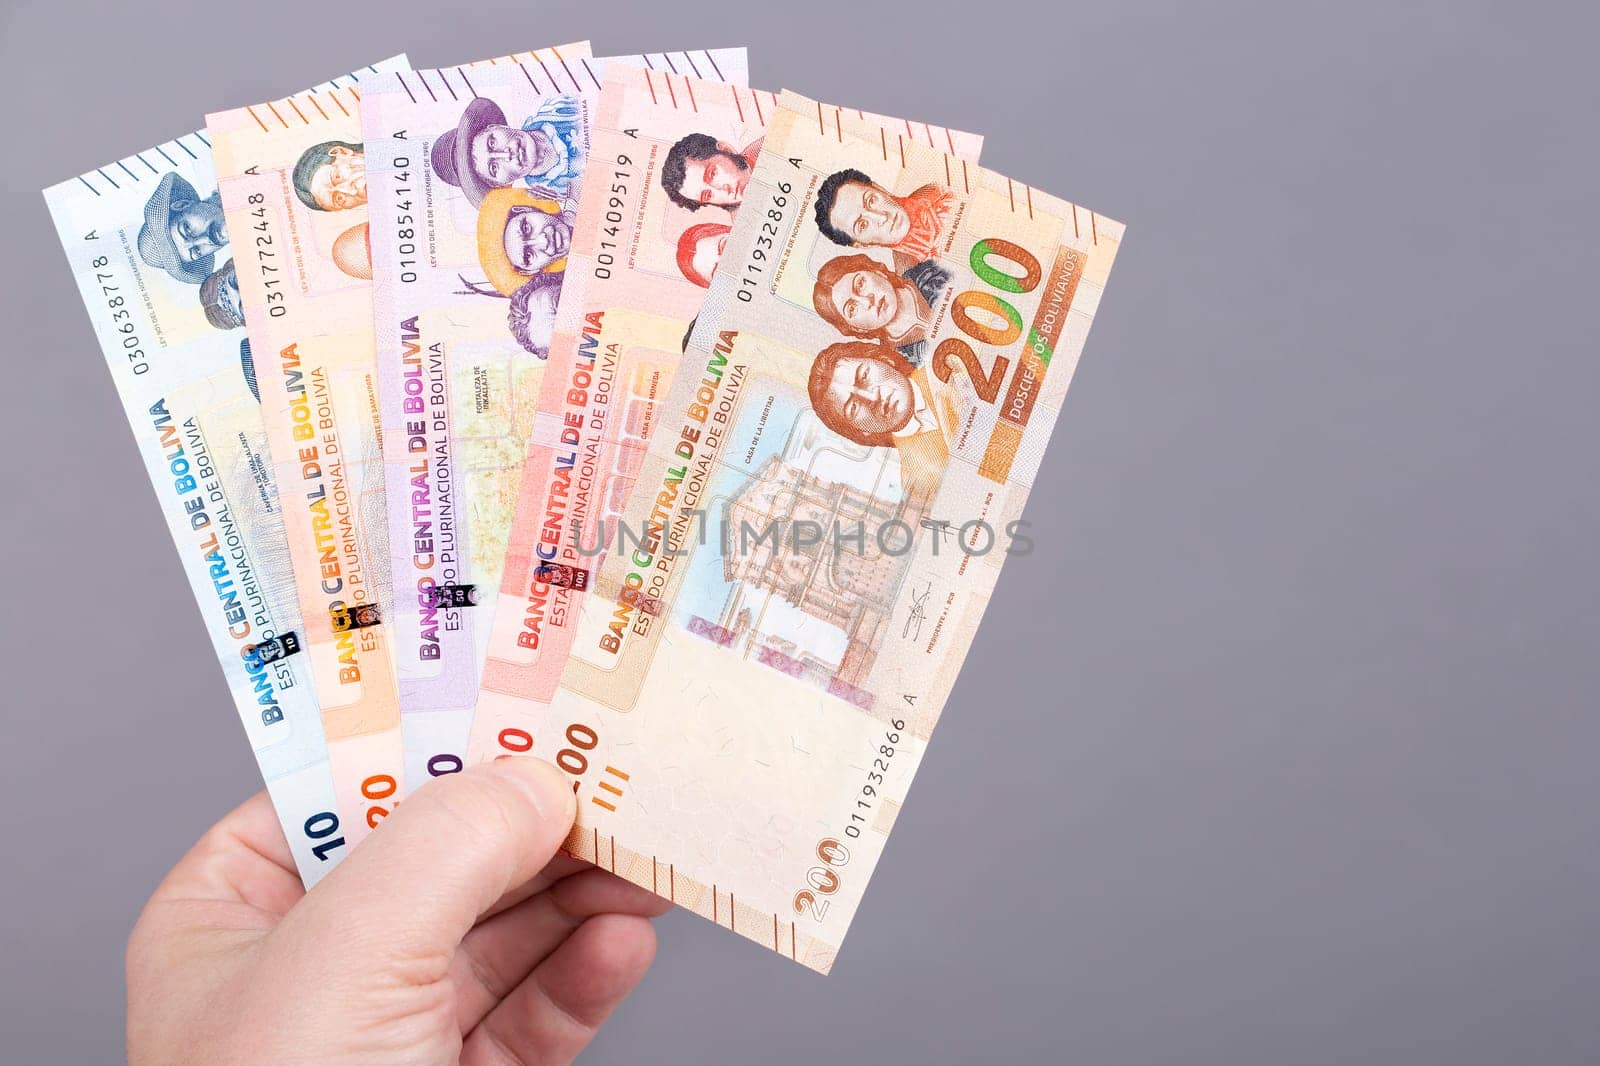 Bolivian money - Bolivianos in the hand on a gray background	